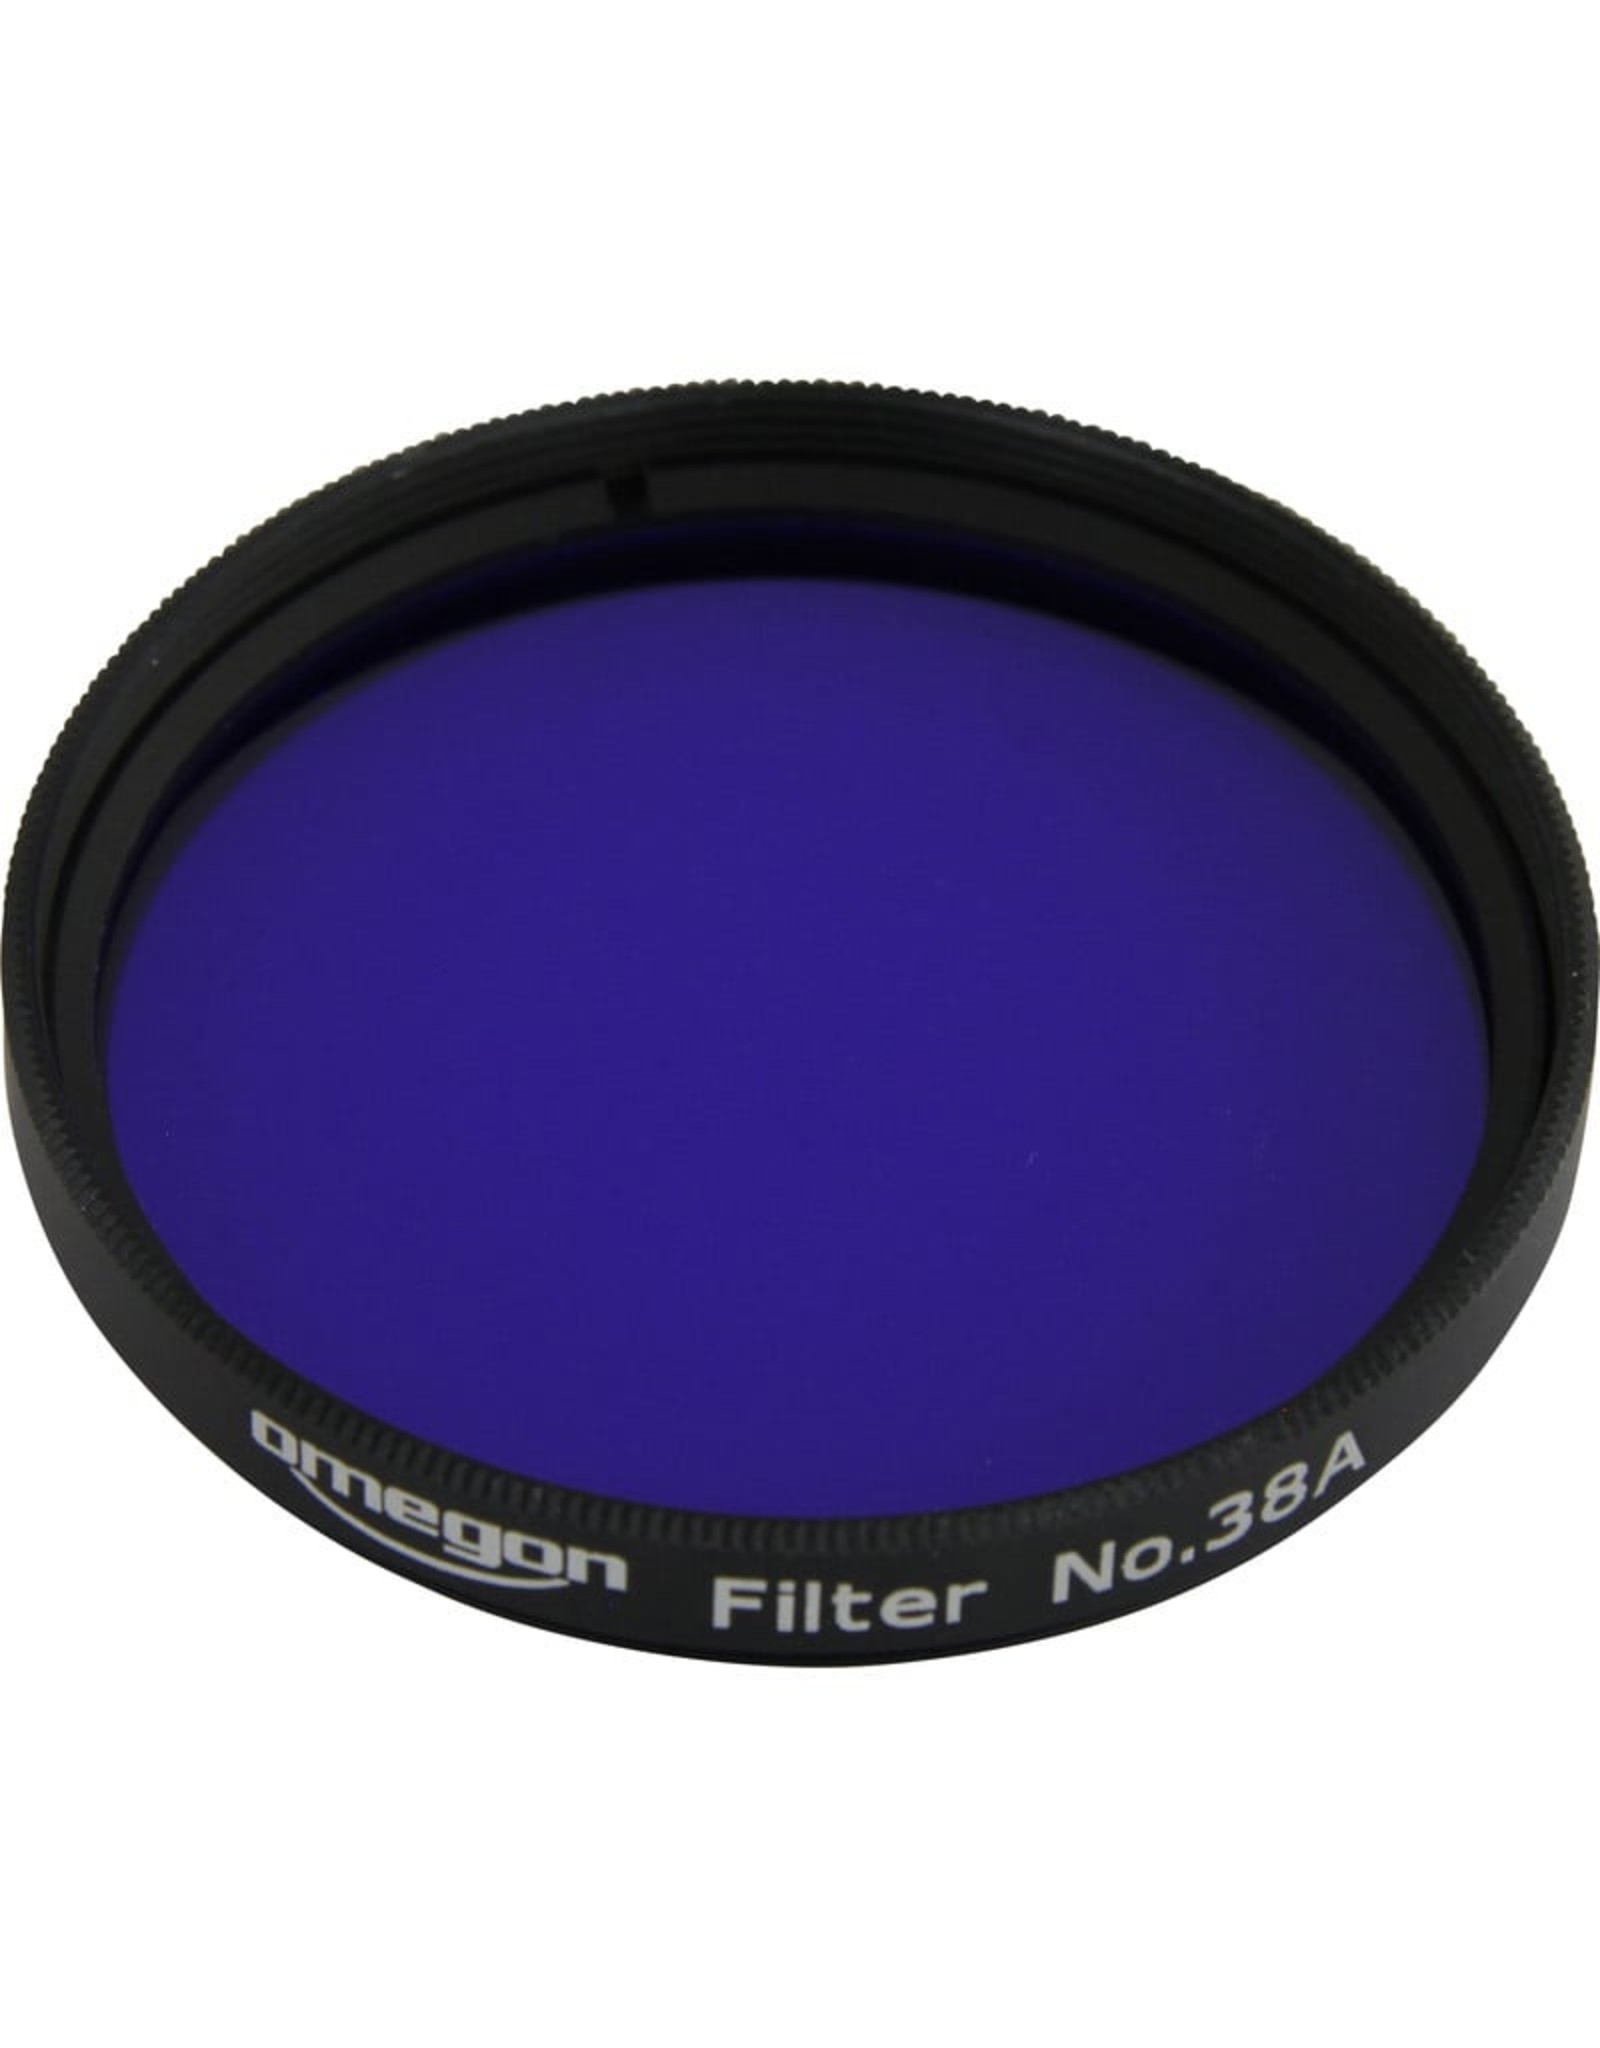 Omegon Filters kleurfilter #38A, donkerblauw, 2''